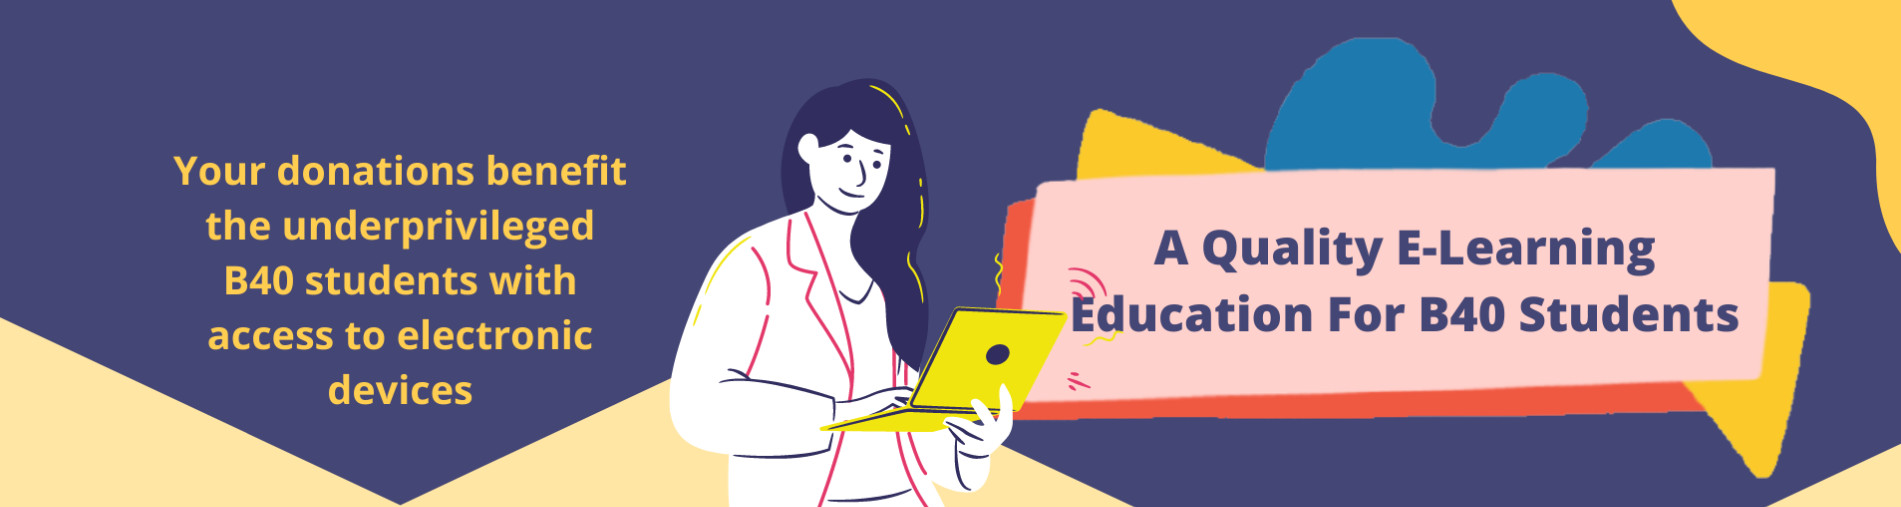 A Quality E-Learning Education For B40 Students